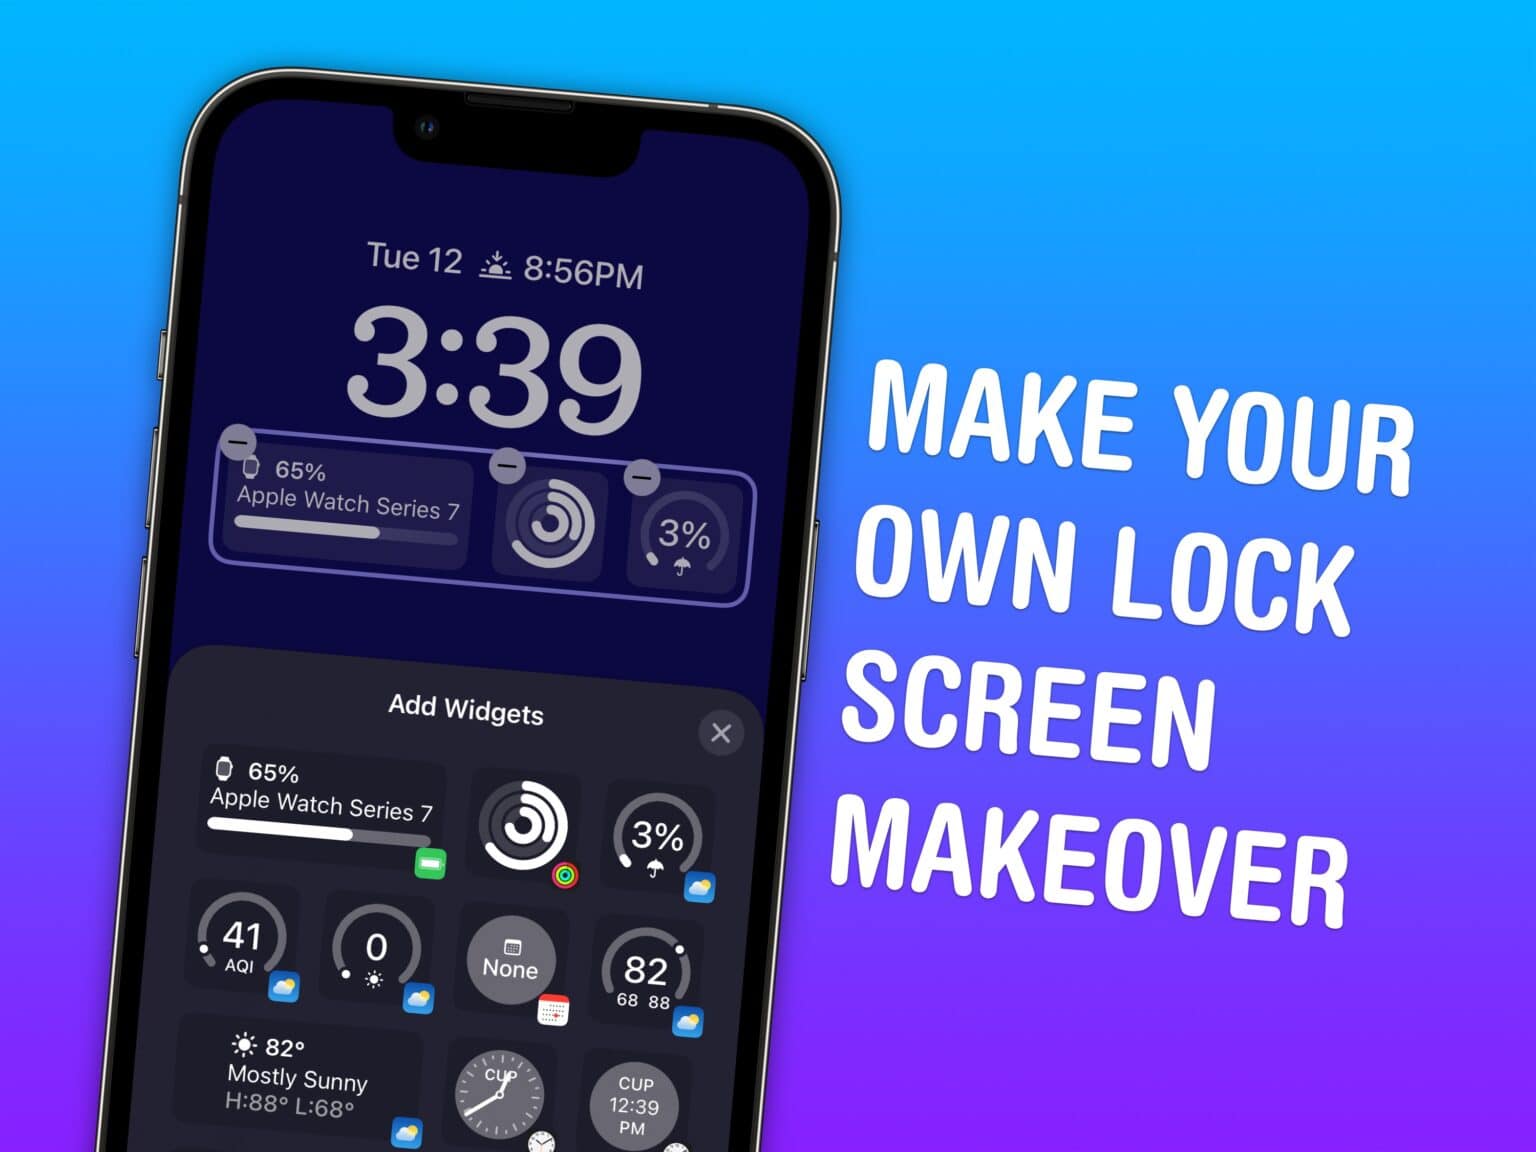 There are a lot of ways to customize the Lock Screen in iOS 16.